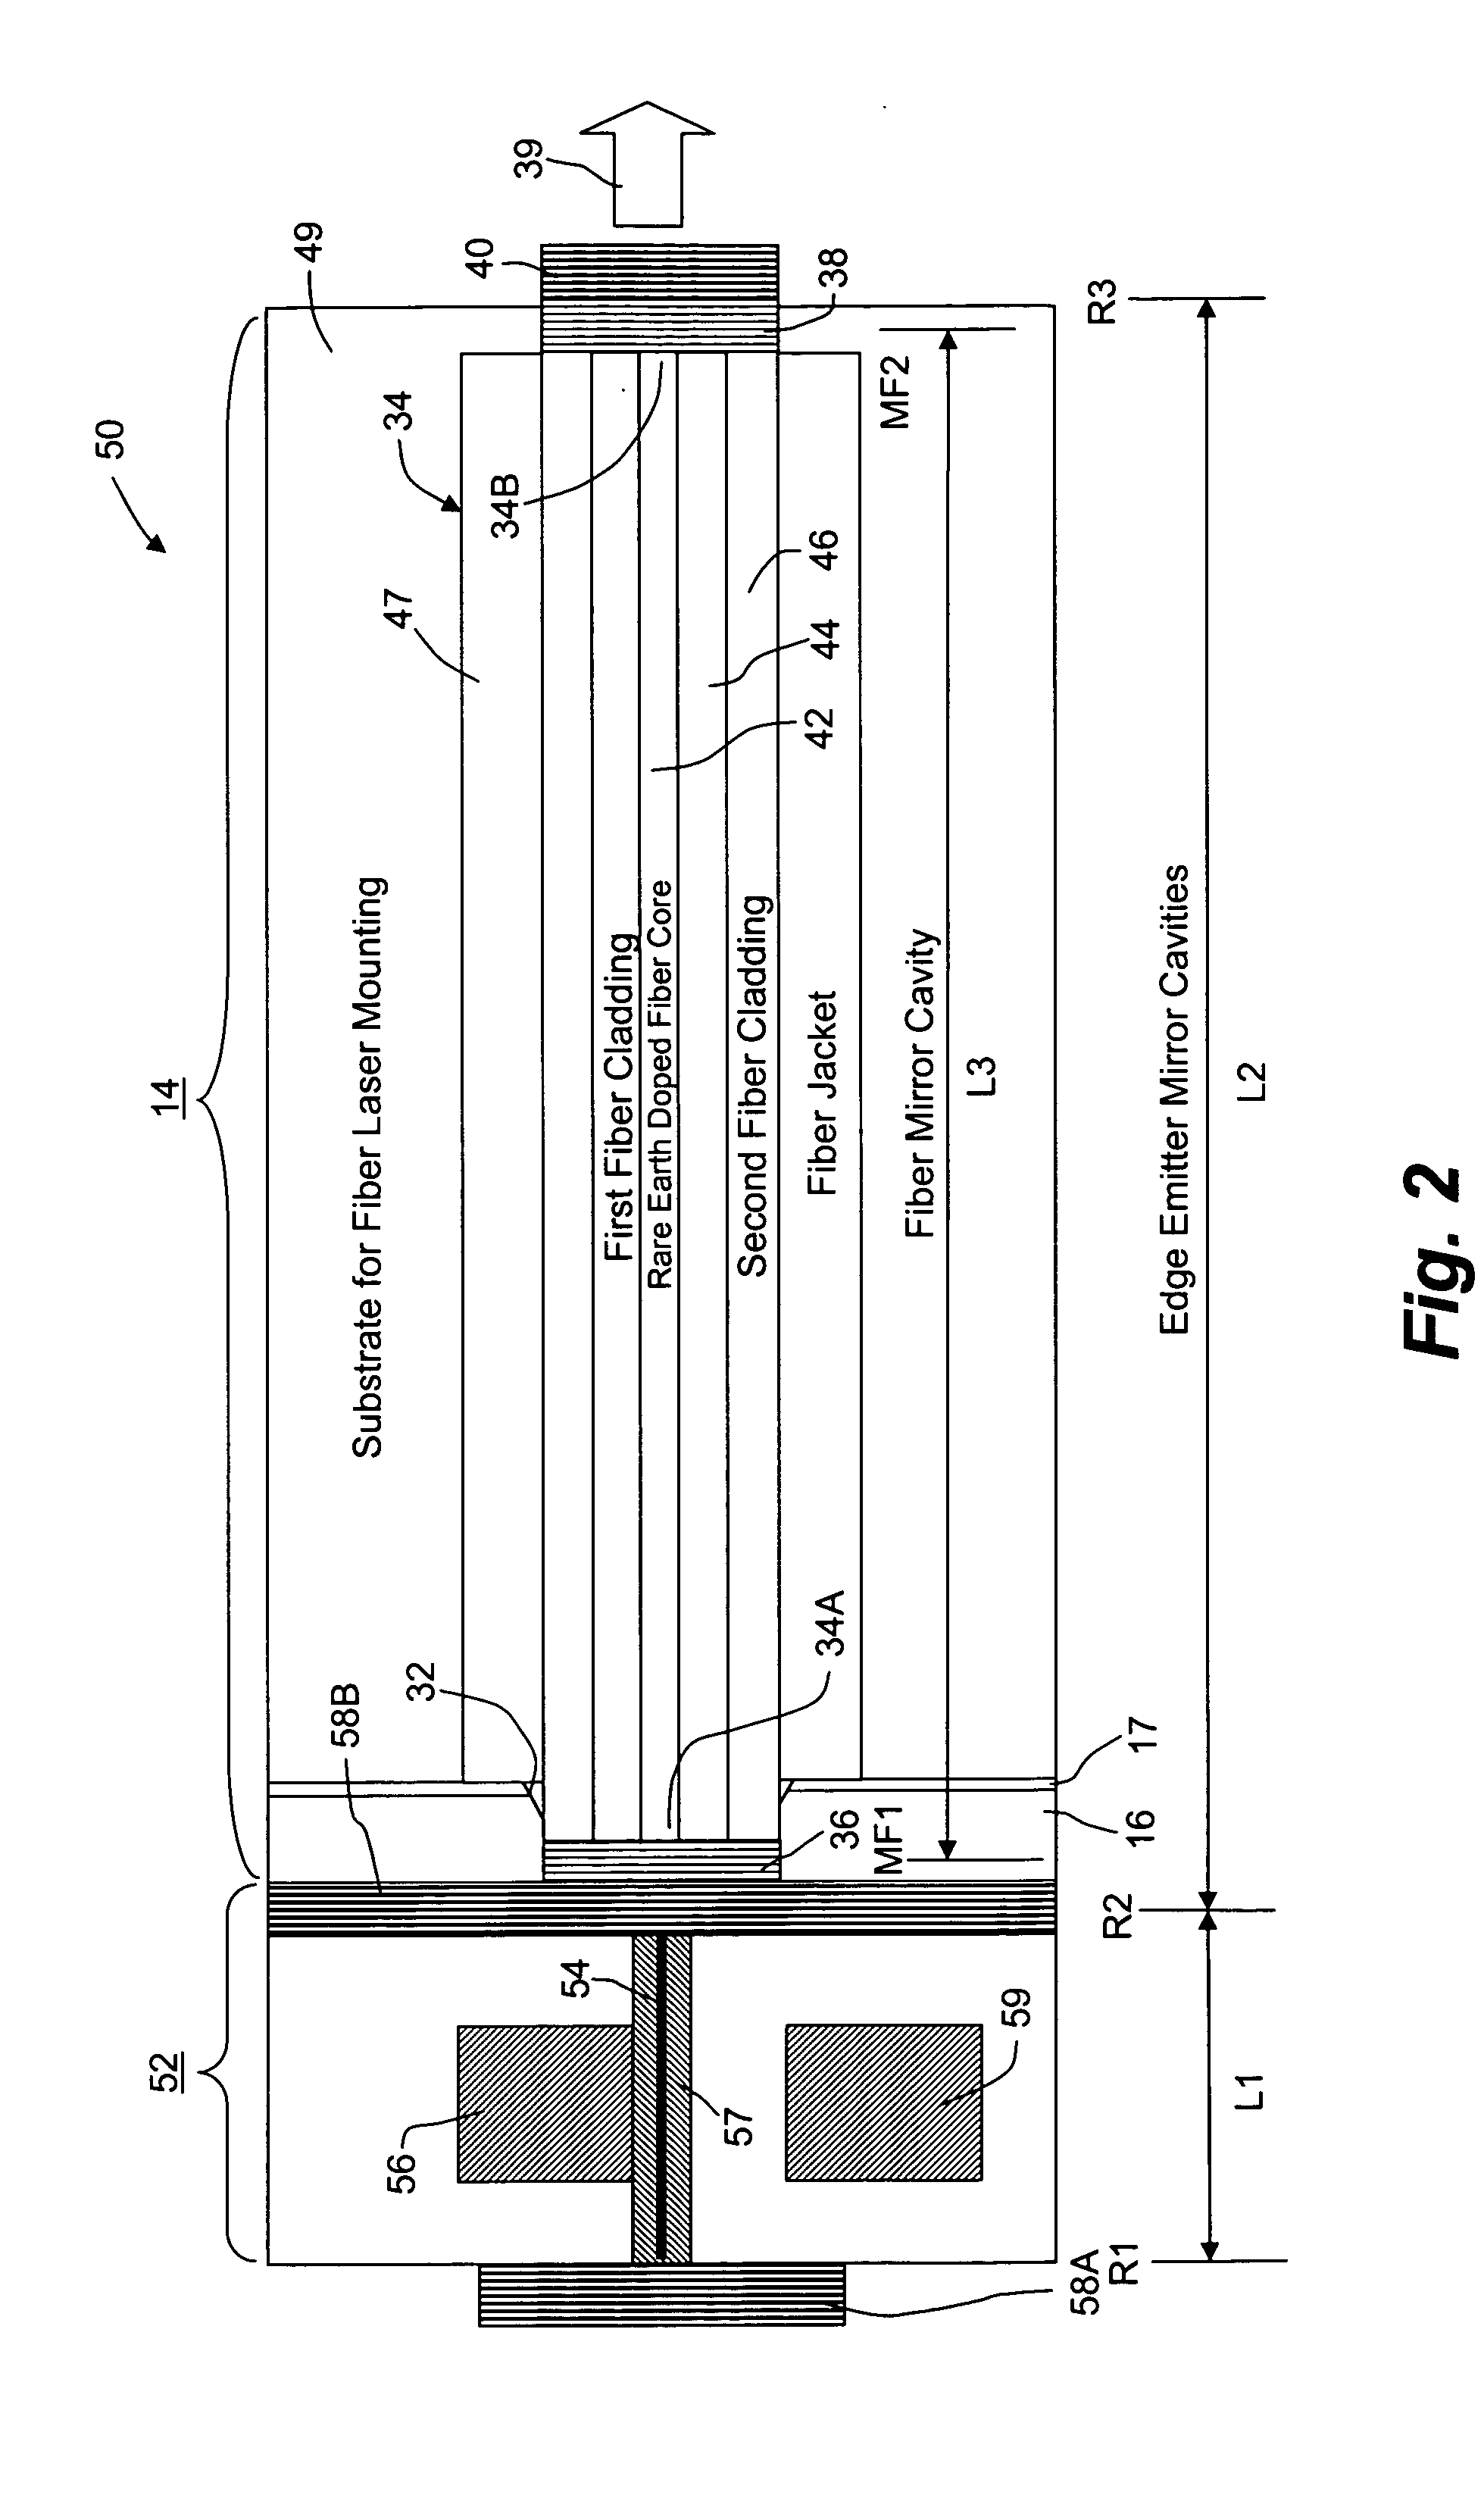 Optical spectroscopy apparatus and method for measurement of analyte concentrations or other such species in a specimen employing a semiconductor laser-pumped, small-cavity fiber laser